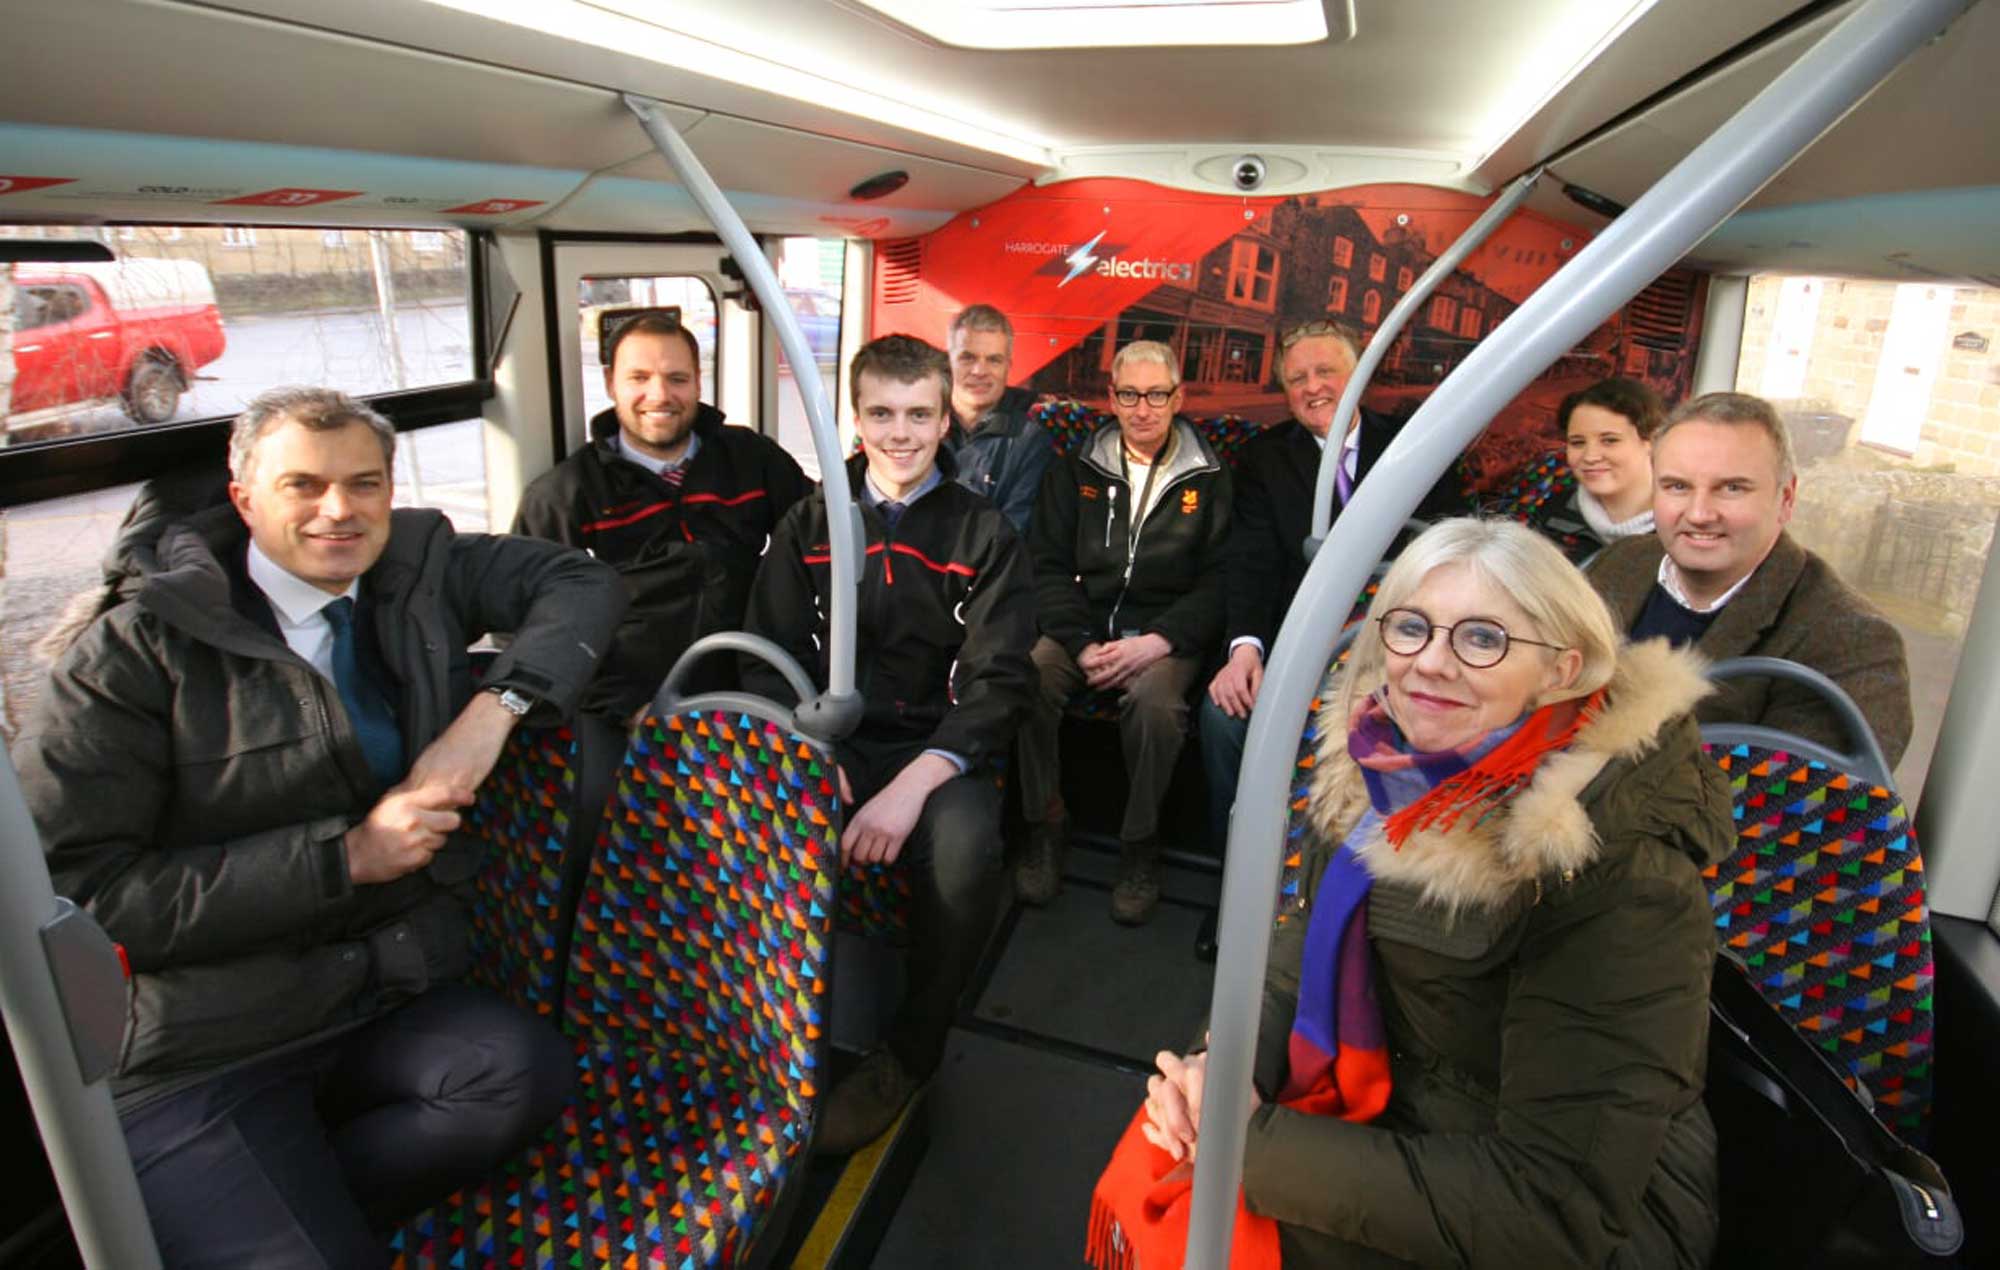 L-R: Julian Smith MP, Alan French (Harrogate Bus Company), Andy Turnbull (Harrogate Bus Company), Paul Chattwood (Dales & Bowland Bus Company), Roy Phillips (National Trust), Keith Tordoff MBE (Nidderdale Chamber of Trade), Helen McDermott (National Trust), Tim Ledbetter (Nidderdale Chamber of Trade), Frances Atkins (Yorke Arms)